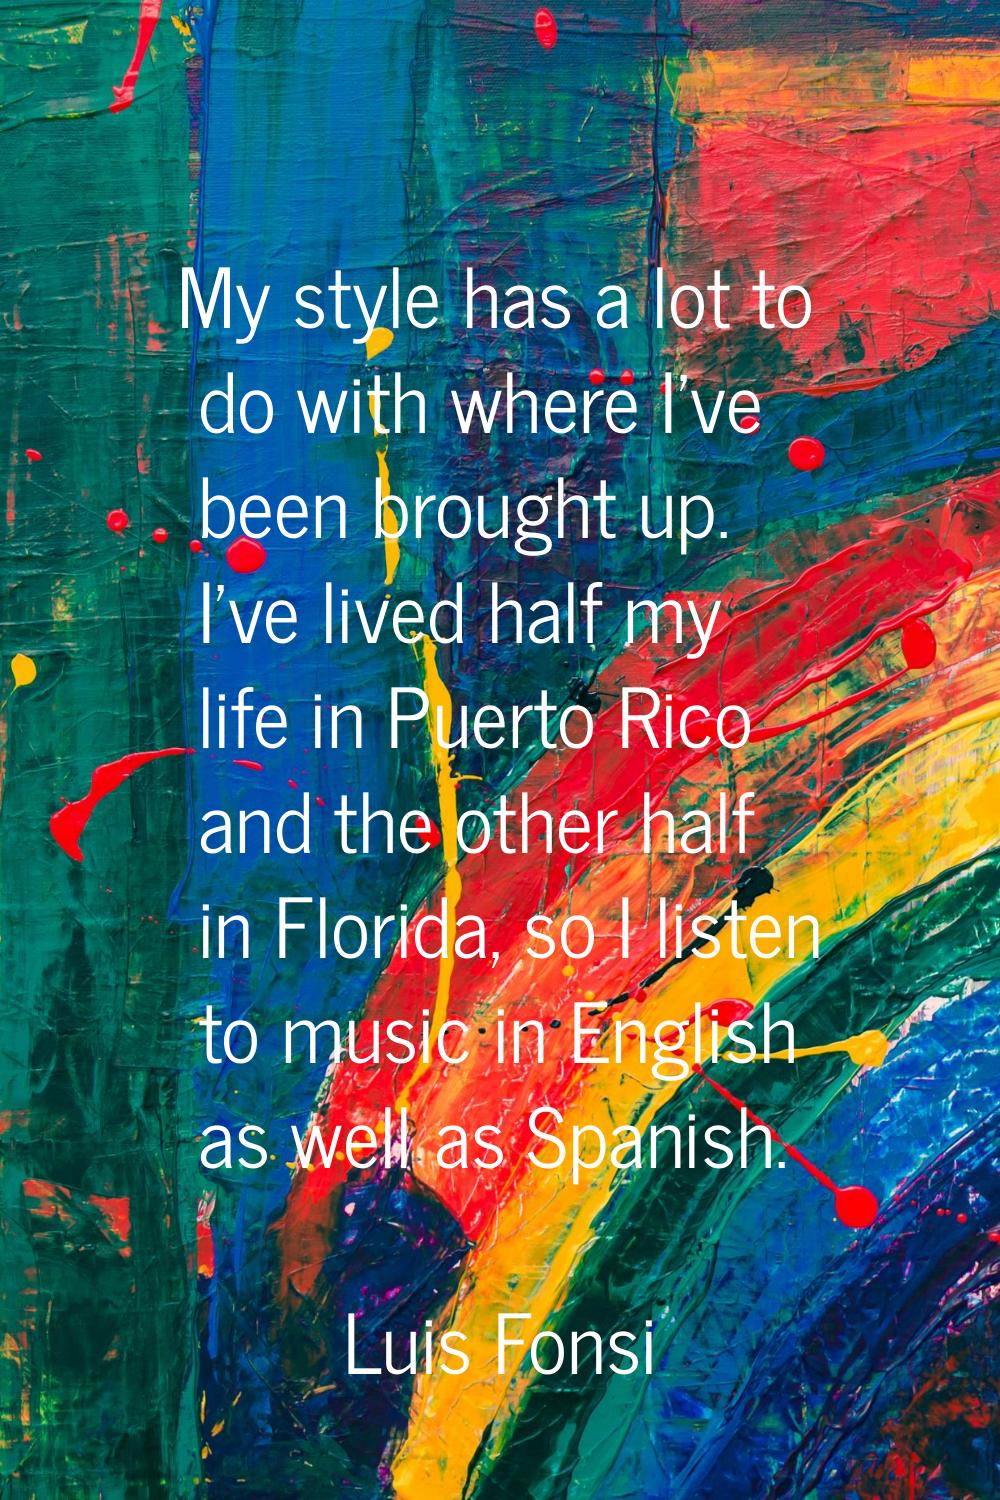 My style has a lot to do with where I've been brought up. I've lived half my life in Puerto Rico an